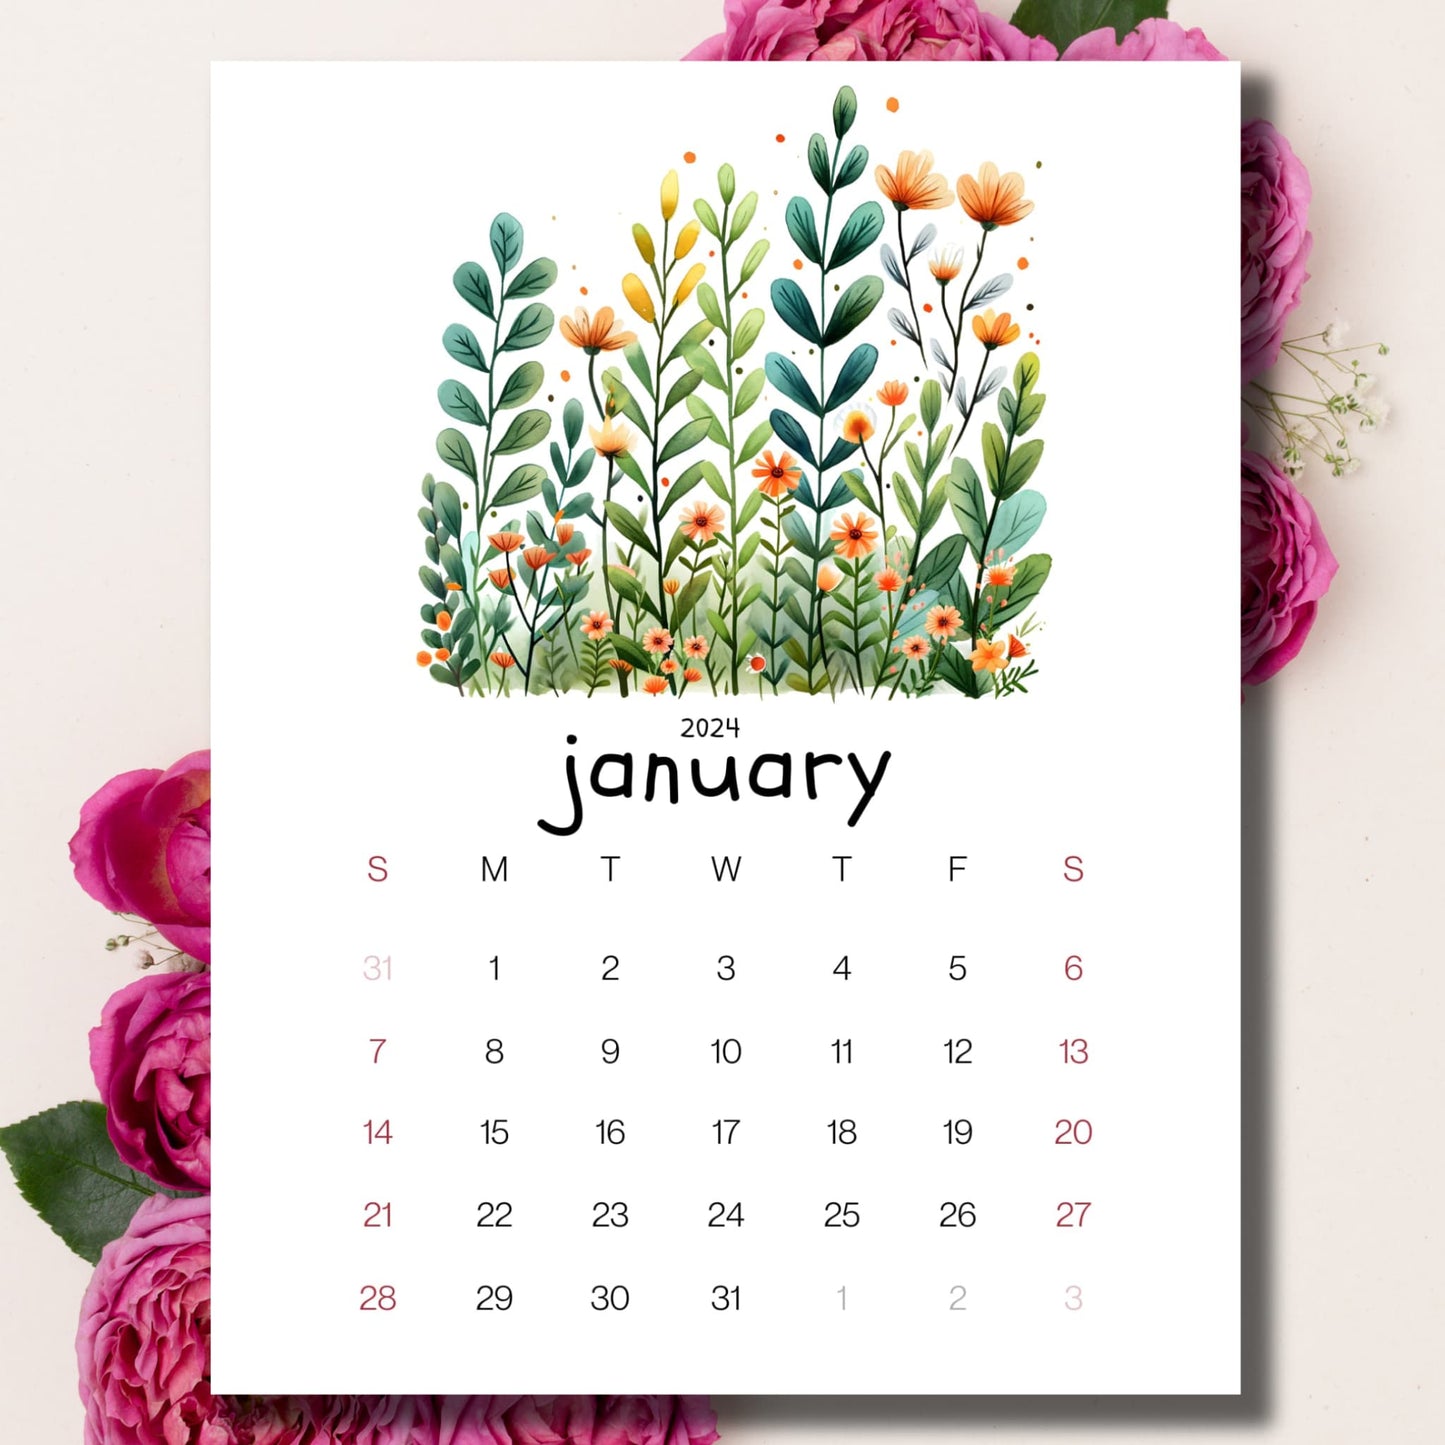 Evergreen Embrace January 2024 calendar laid on a beige background with pink peonies.